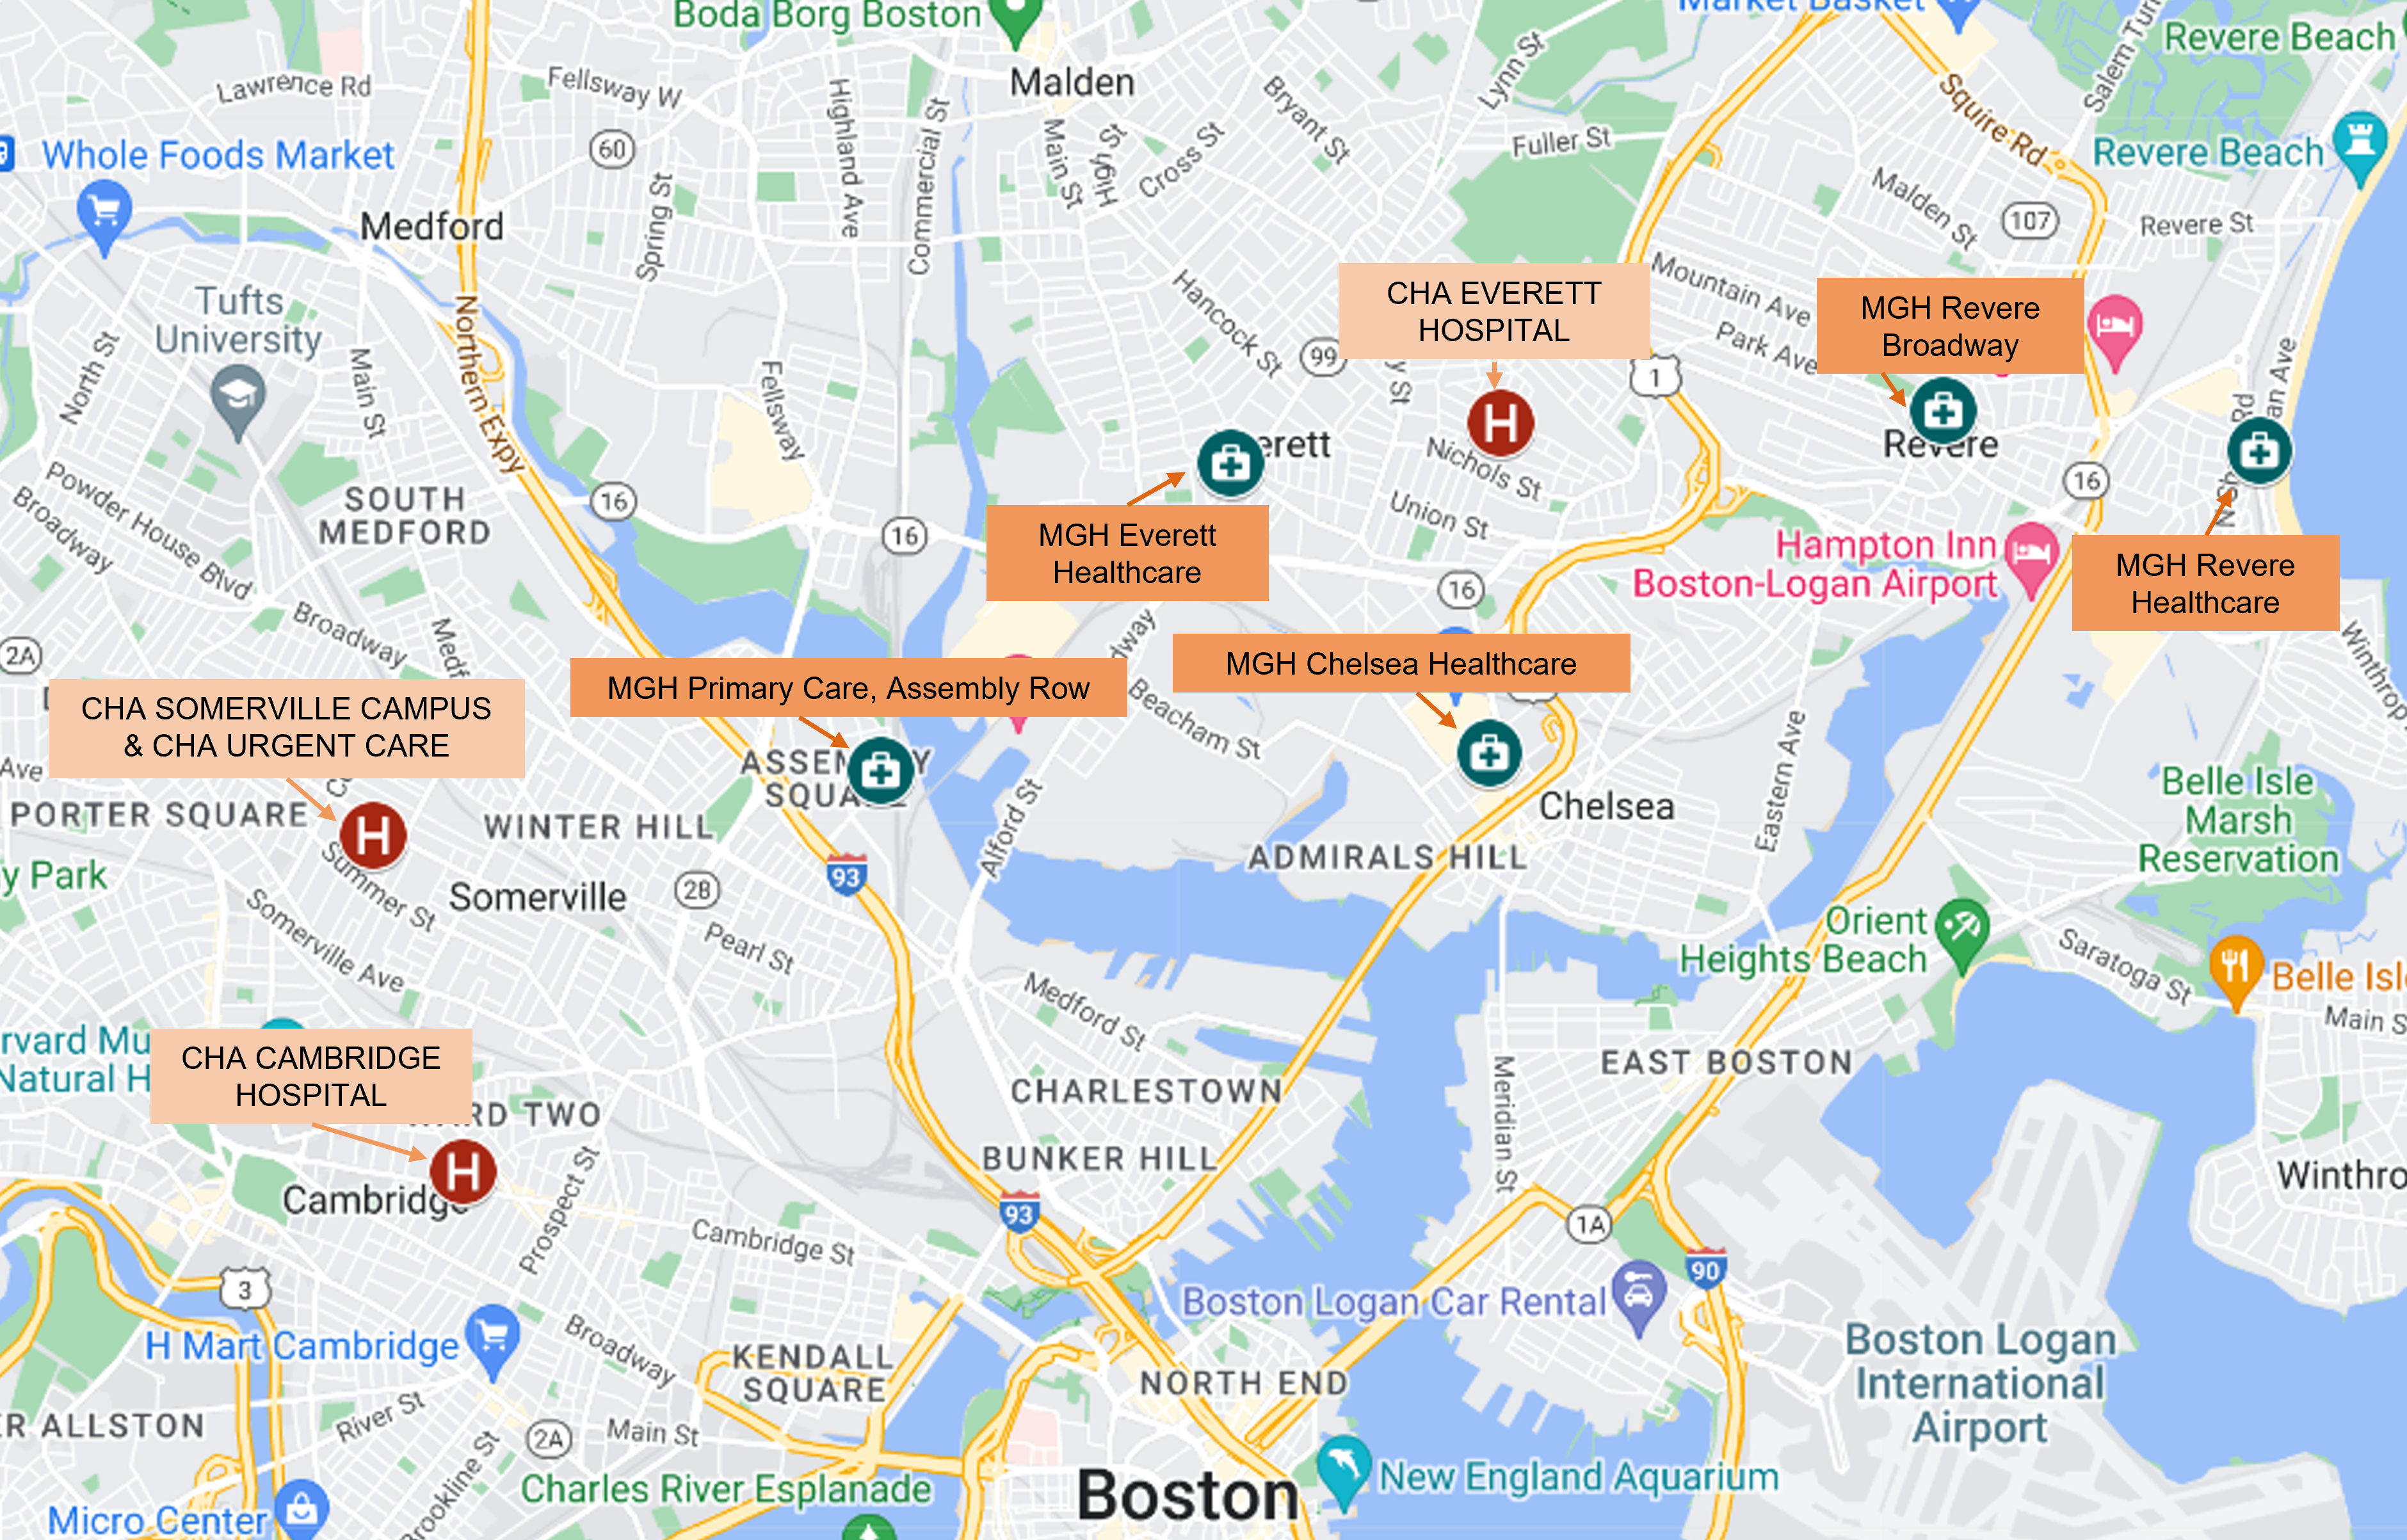 Map showing approximate location of CHA and MGH facilities